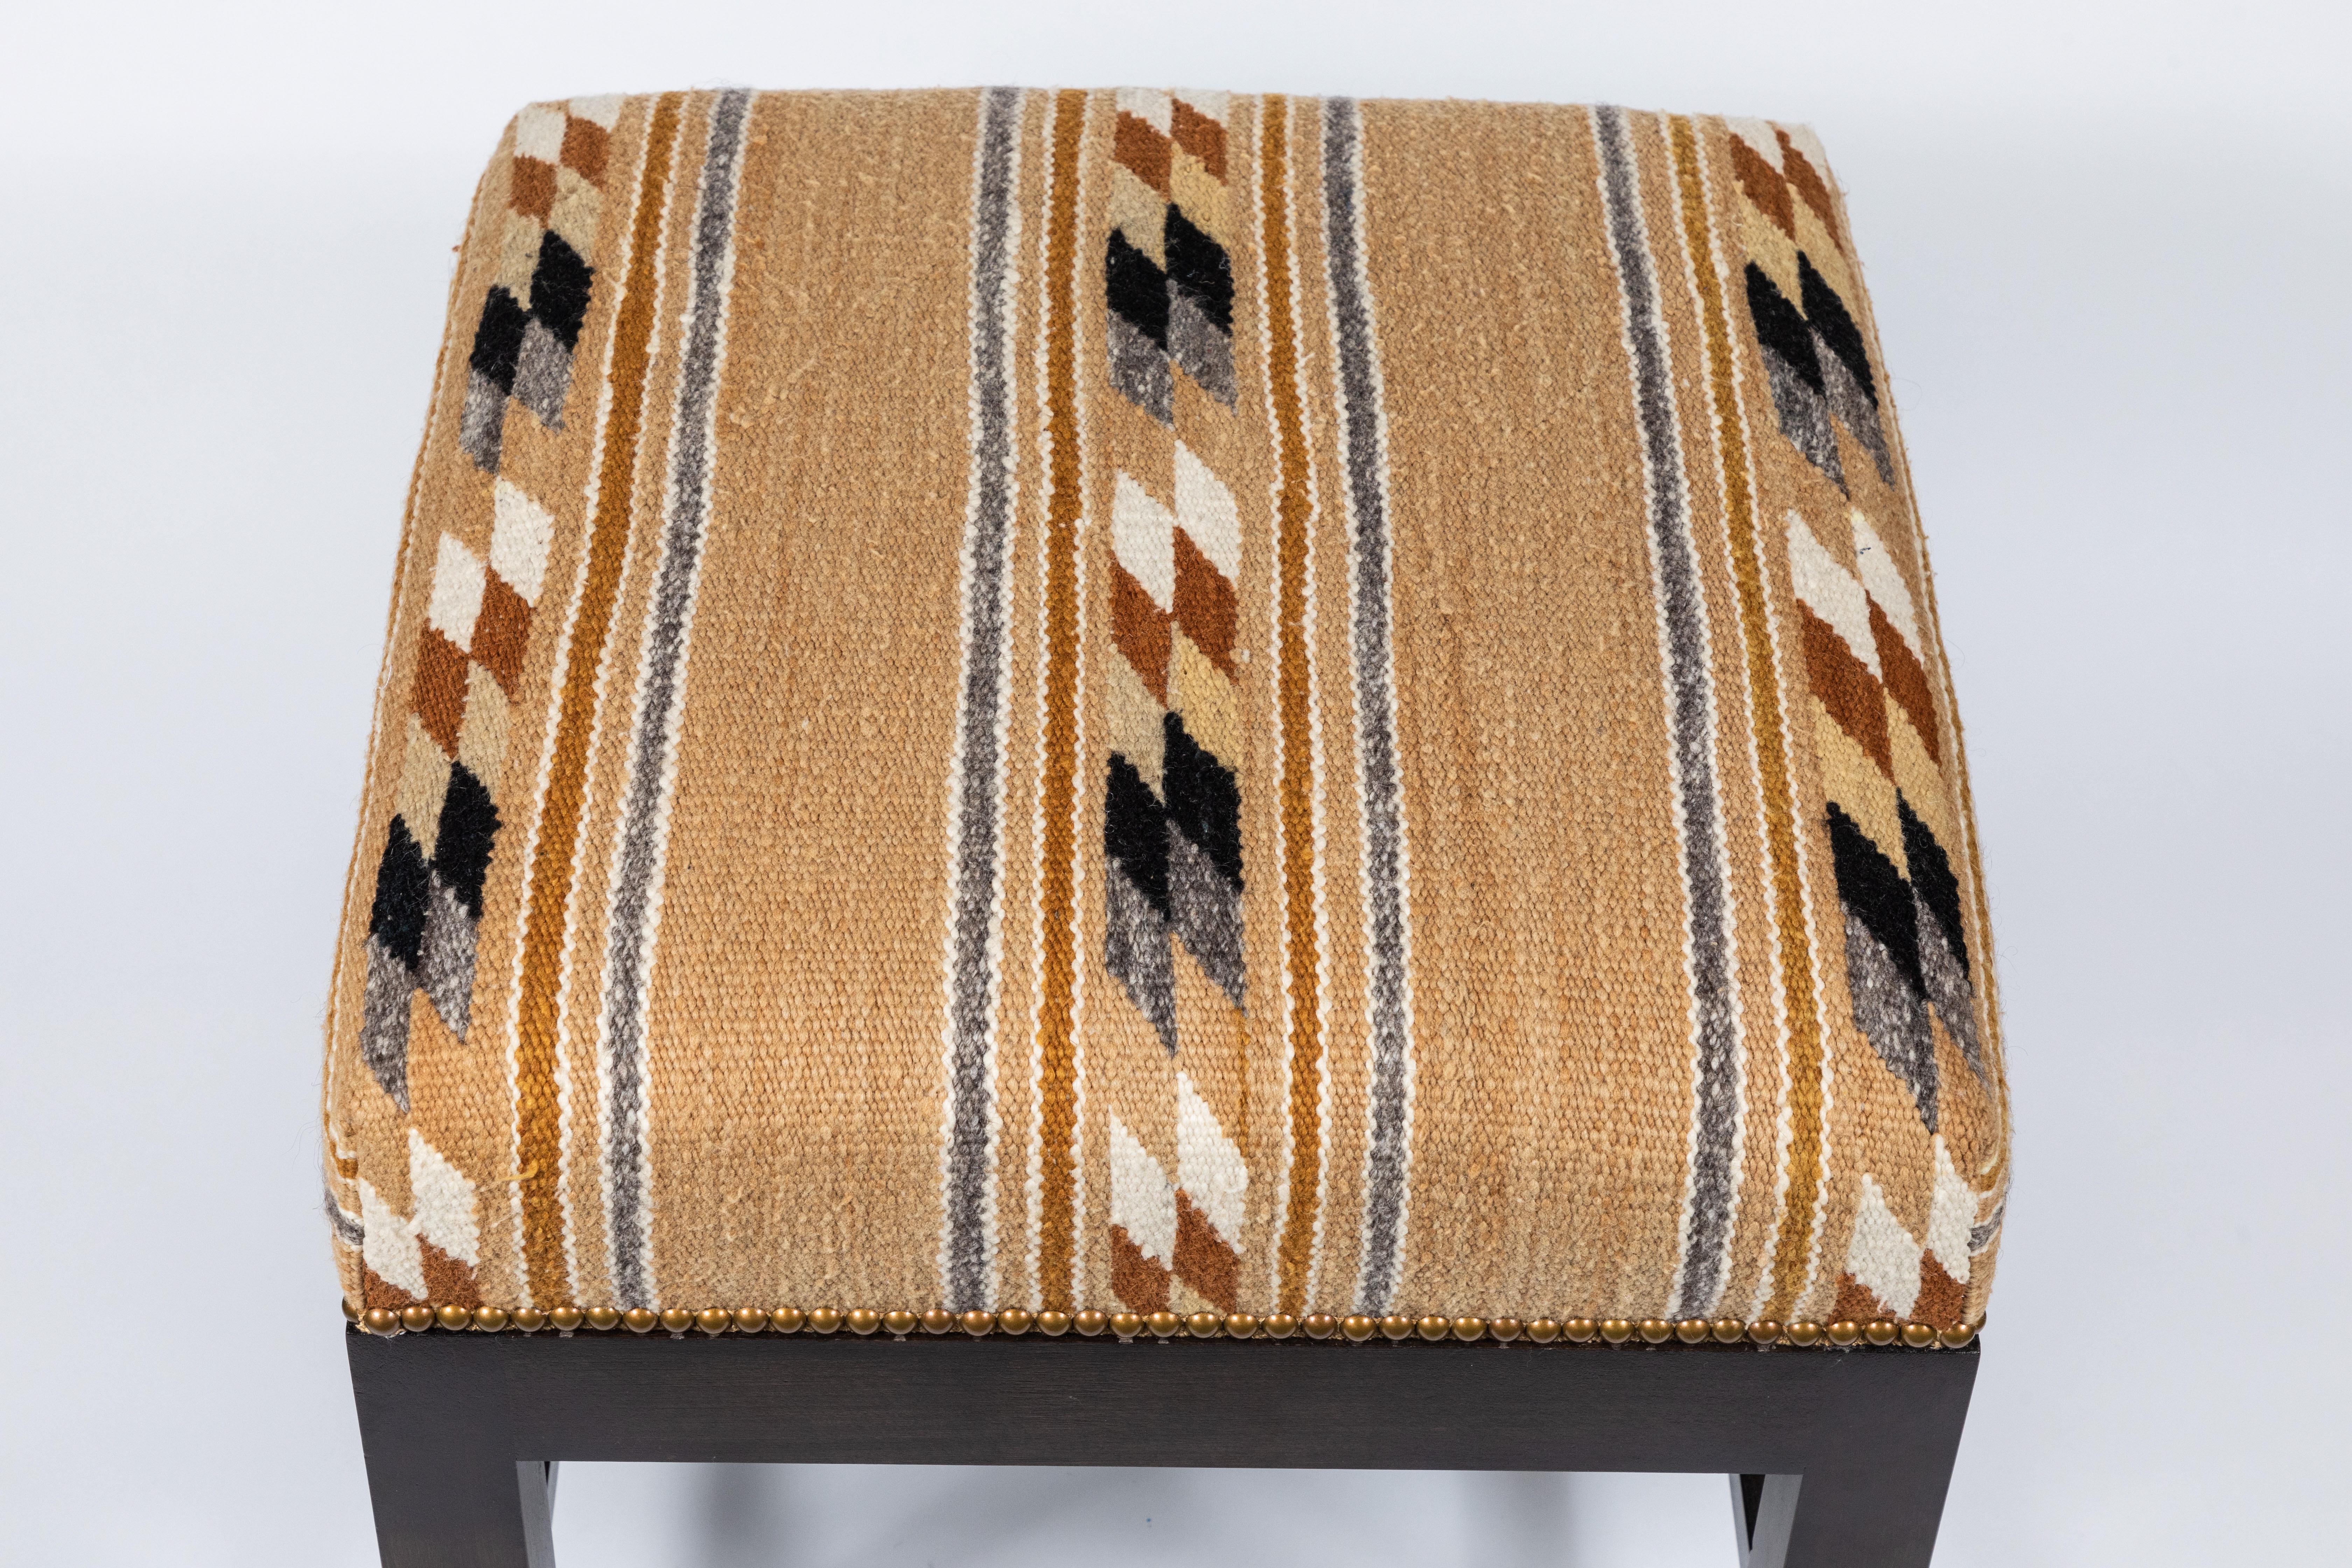 This is a new low stool upholstered in a vintage Native American rug textile in caramel, browns, and gold. This boxy ottoman can be seating or a table stool and features a walnut finish, stretchers, nailhead trim, and floor glides. 

* 1 available

